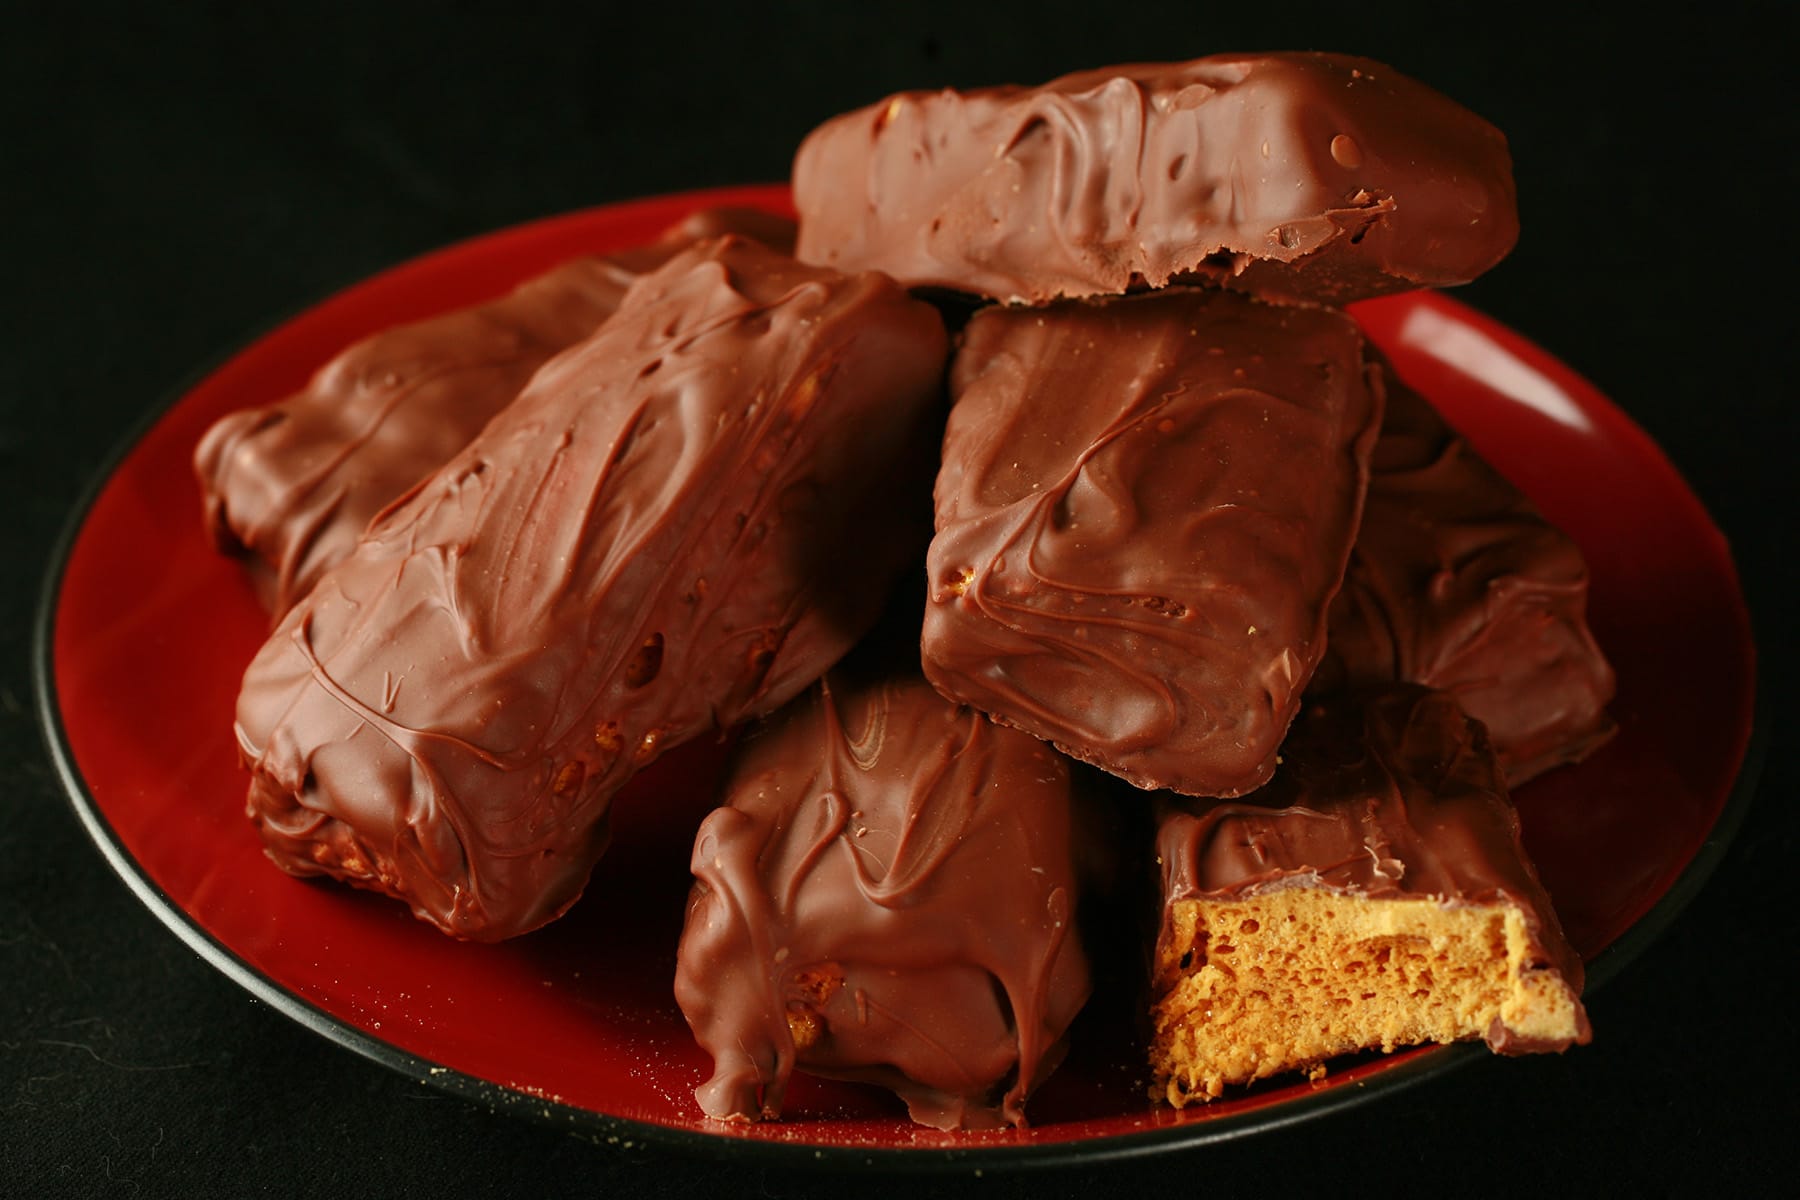 A small red plate is piled high with homemade crunchie bars. One is broken in half to reveal the honeycomb toffee inside.